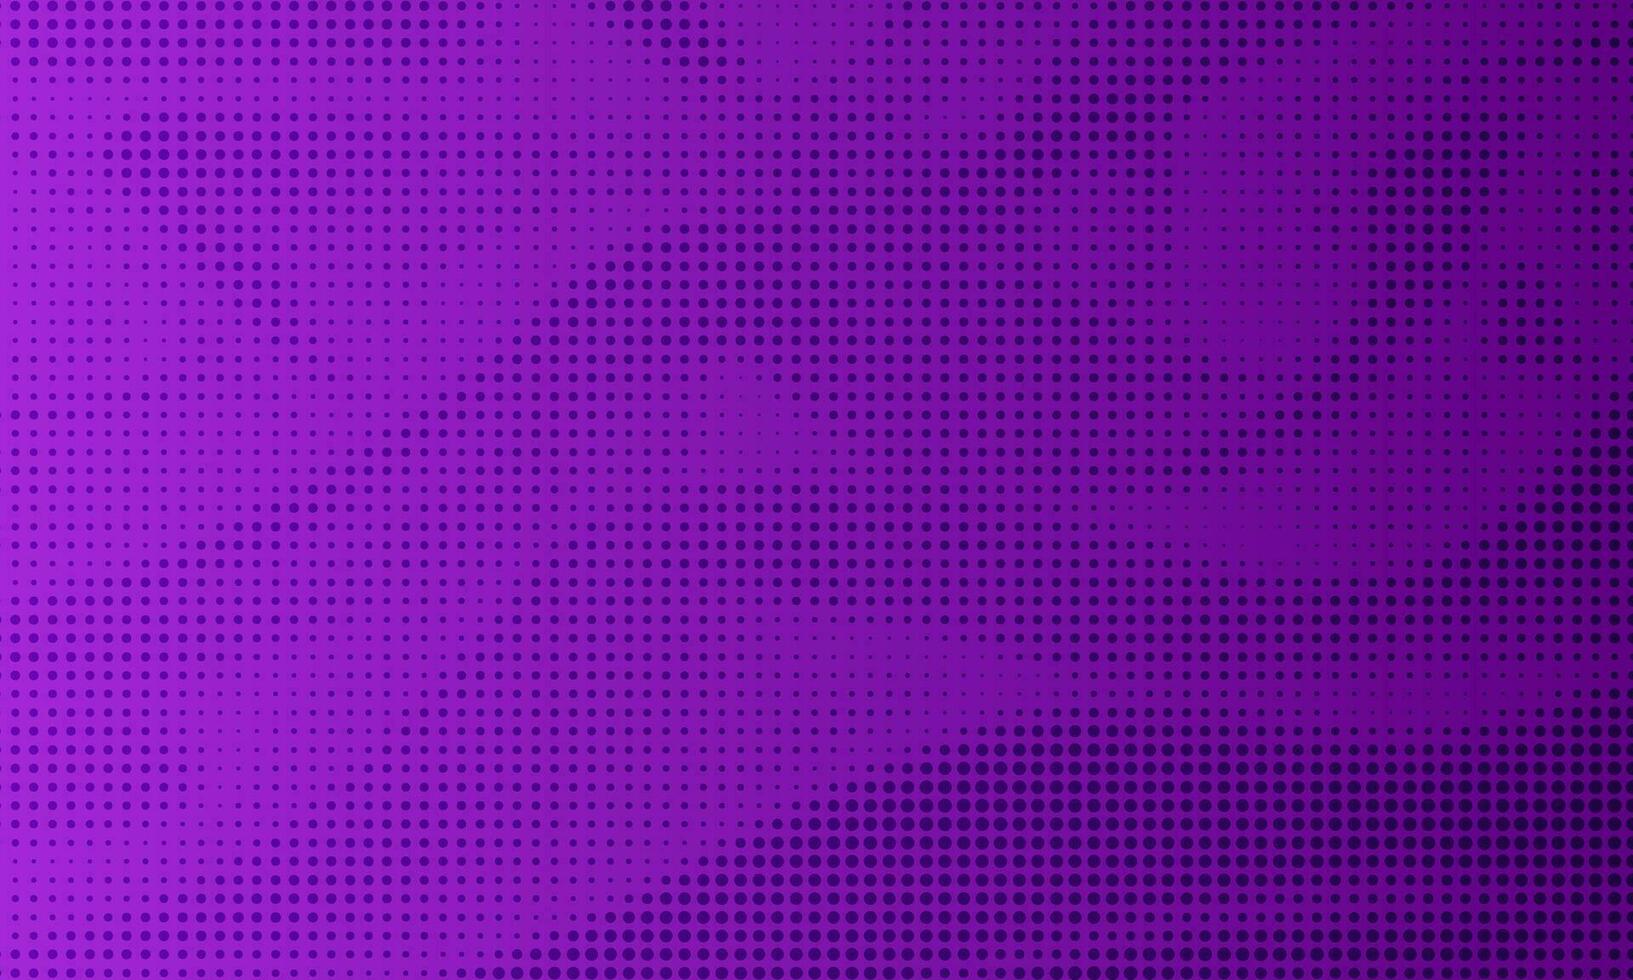 Violet blurred vector background with halftone effect.